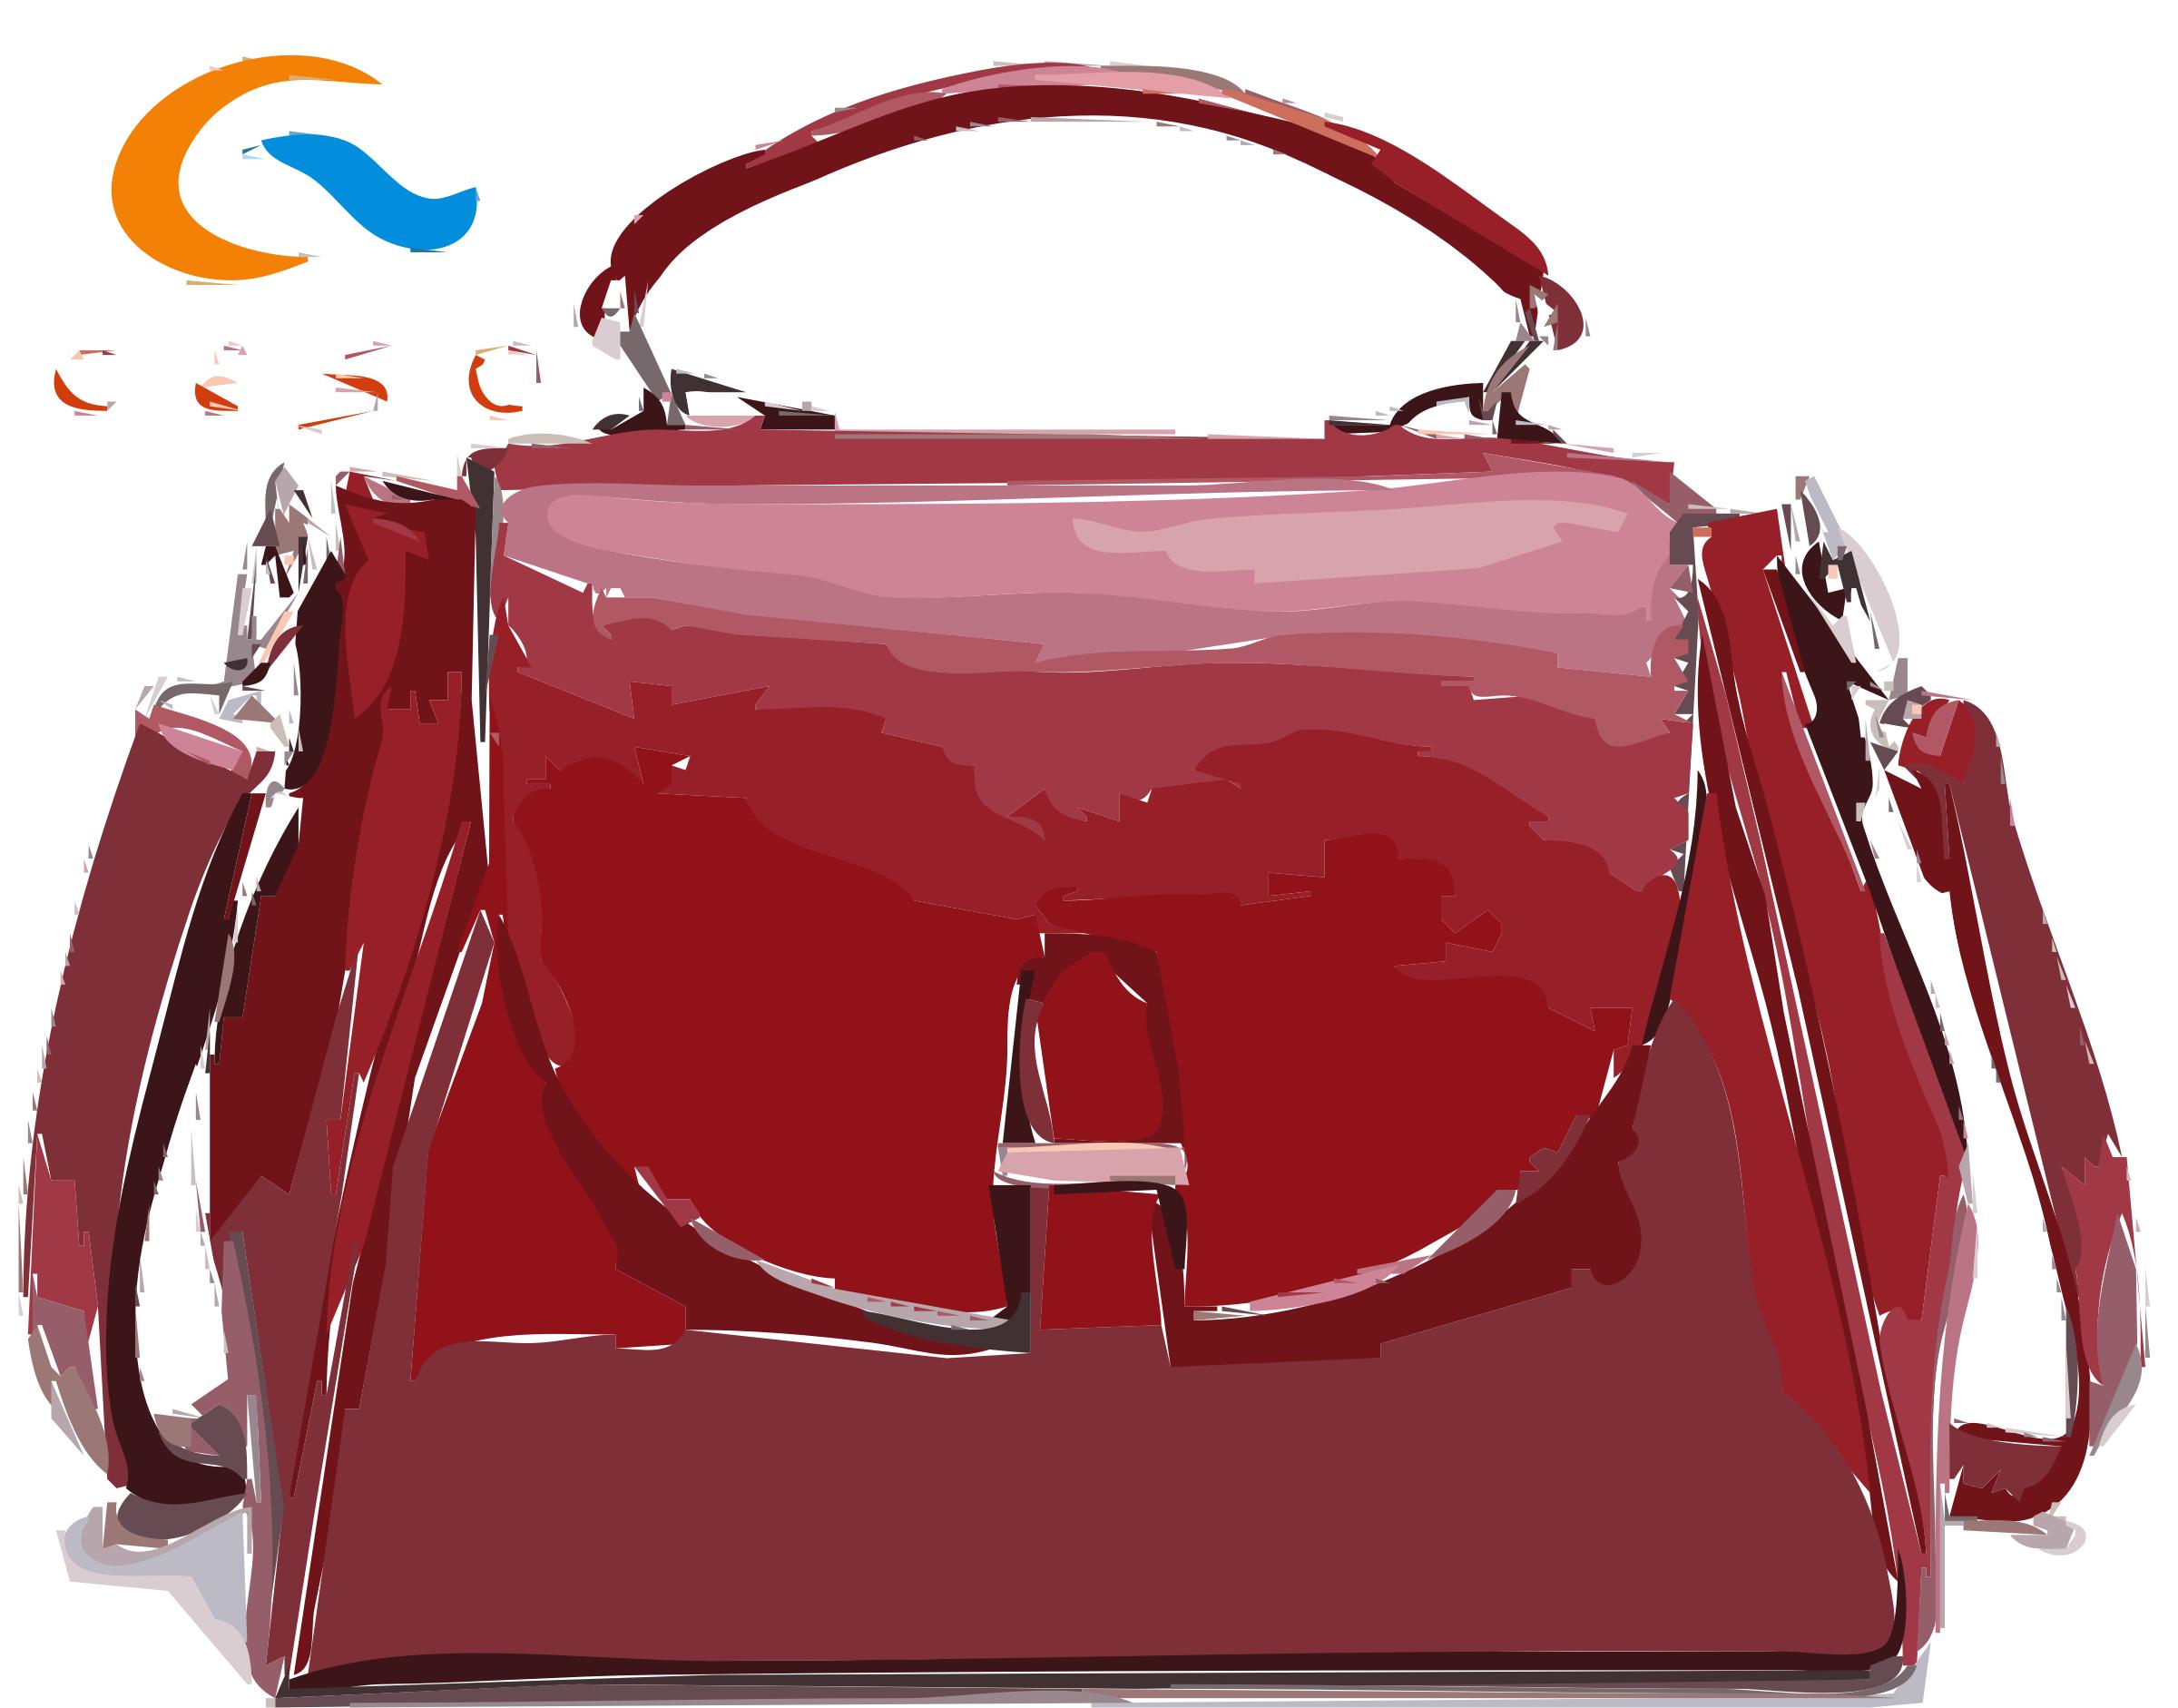 Fwd: 2016 Newest Popular handbag designs from Ceso 30 png